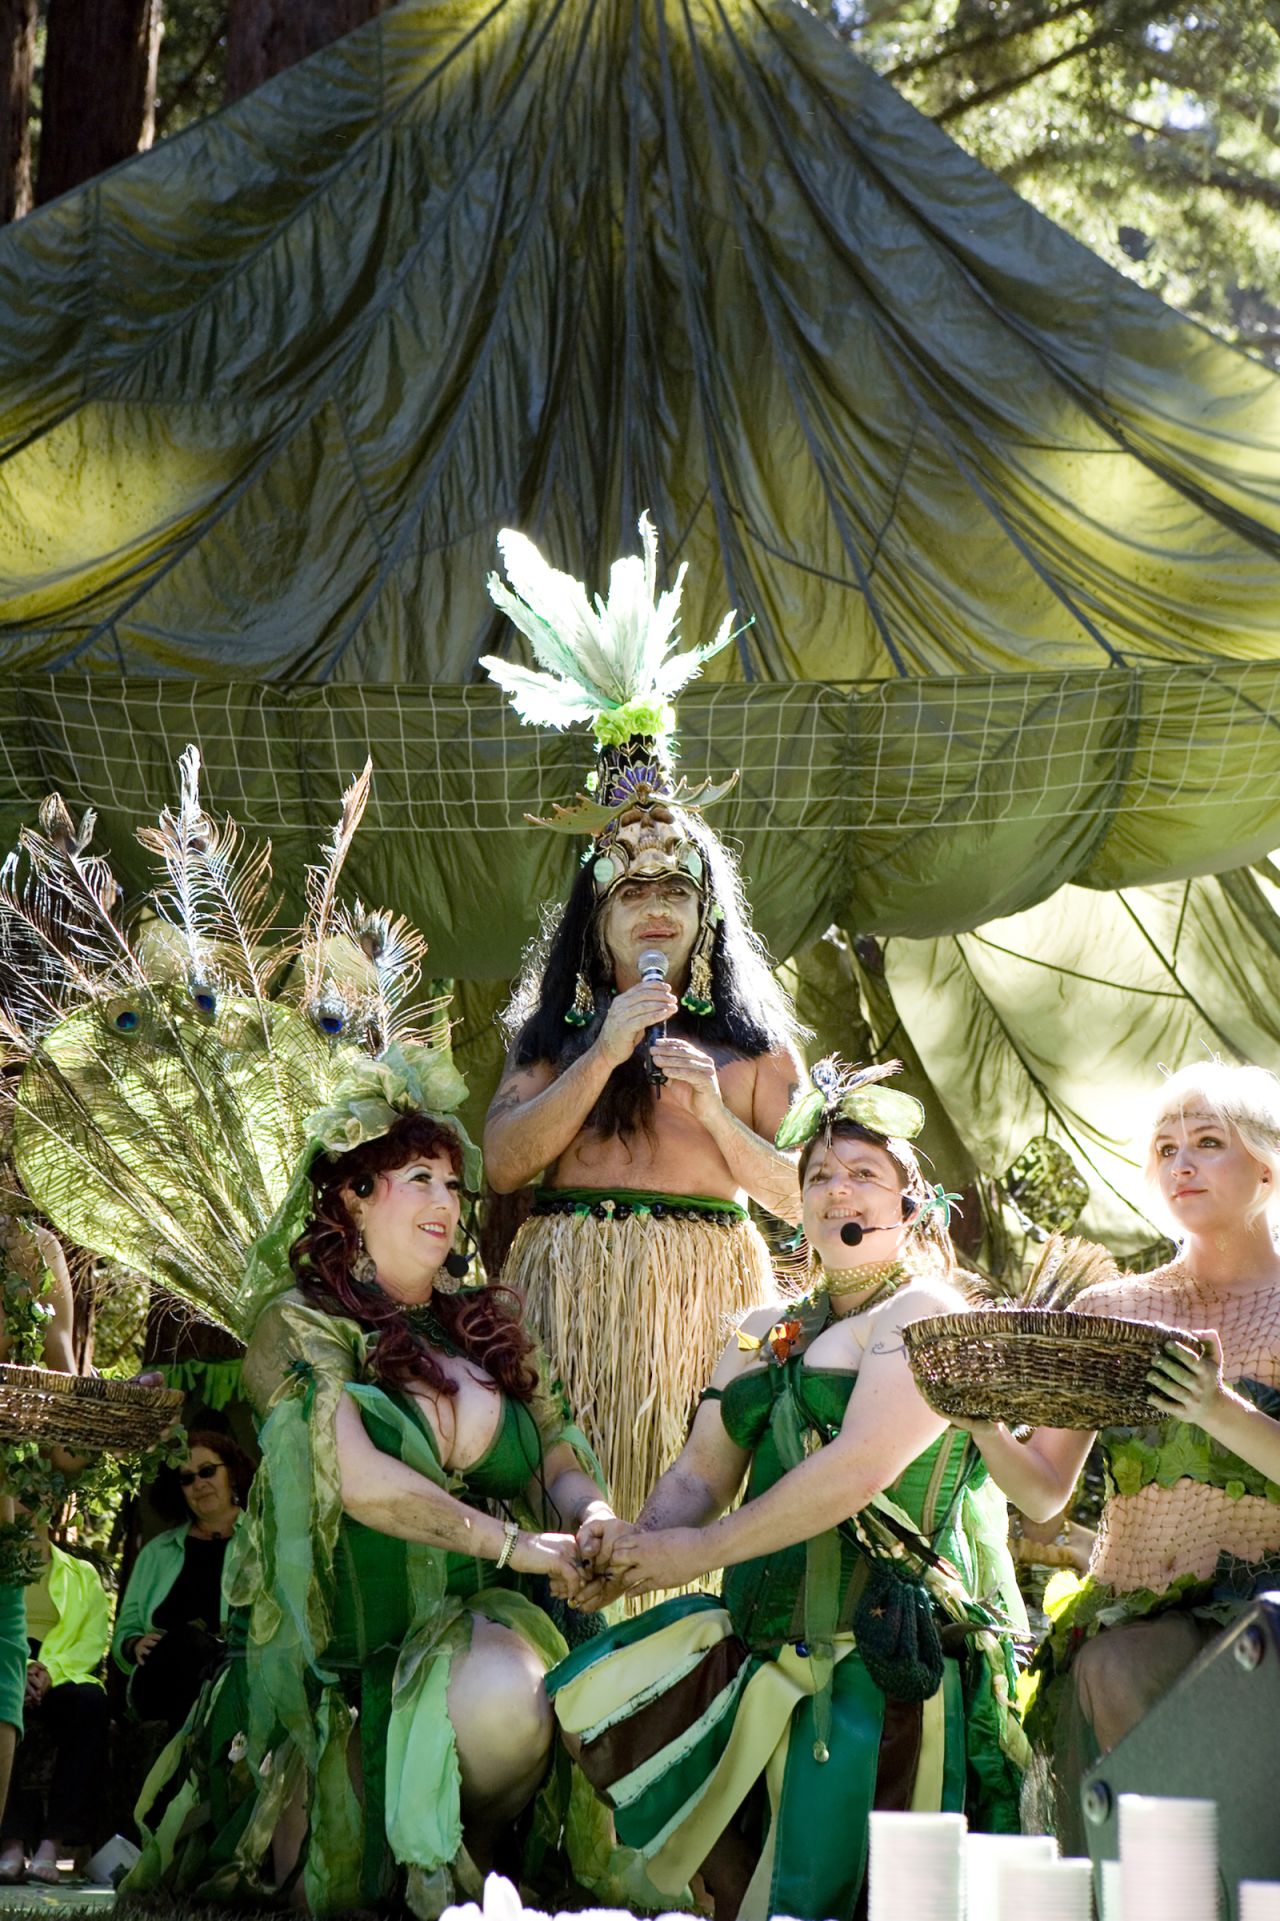 Performing as a high Aztec priest, artist Guillermo Gómez-Peña officiated the "Green Wedding" in 2008.